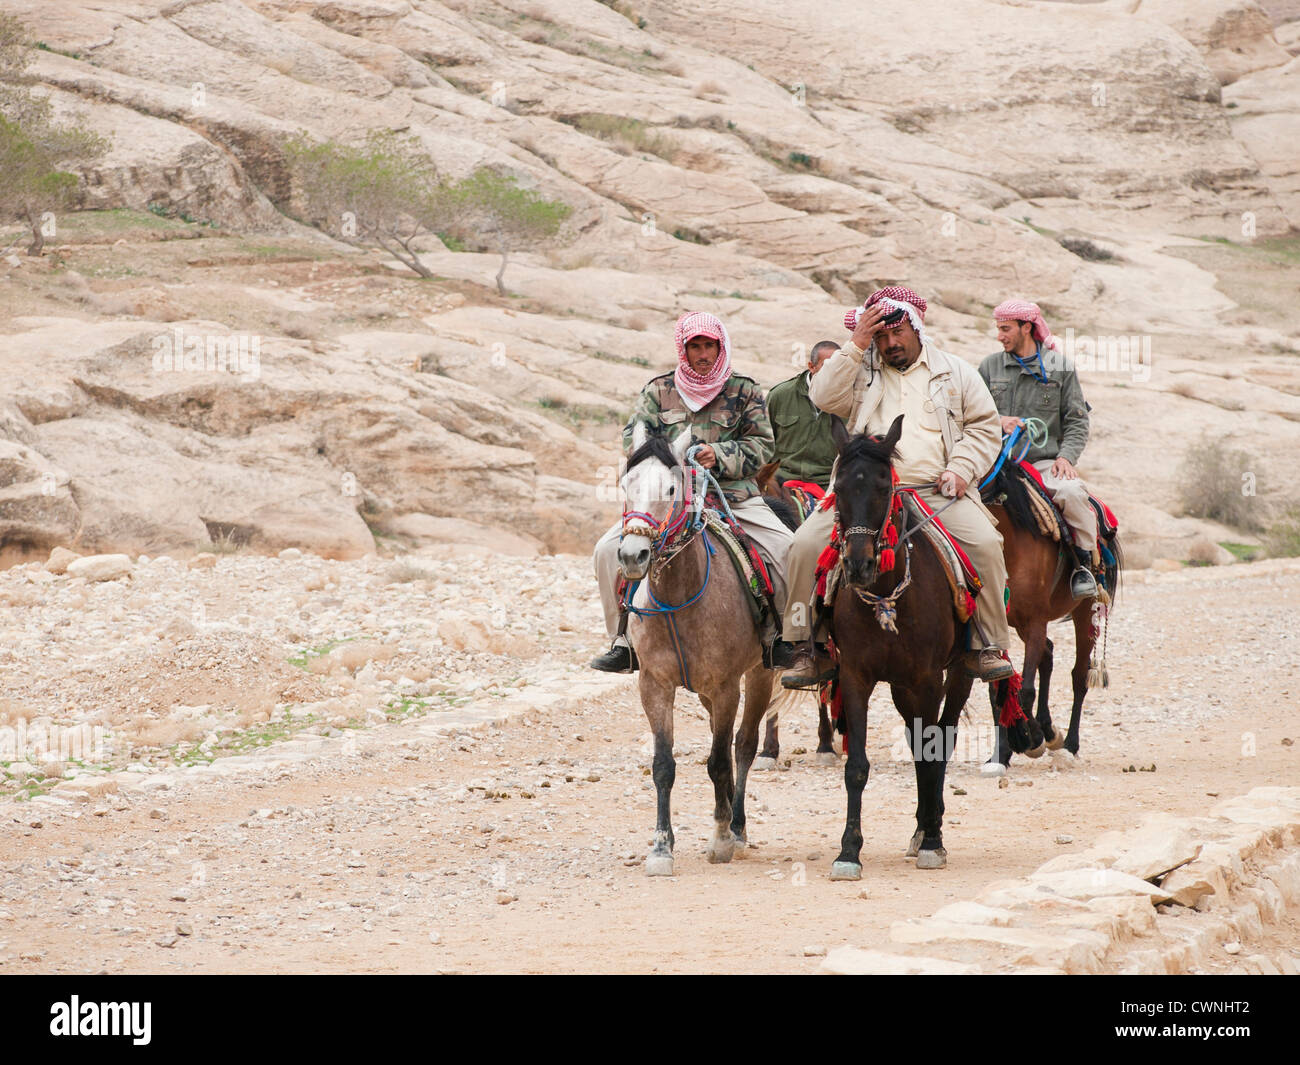 Horses At Petra Jordan High Resolution Stock Photography and Images - Alamy